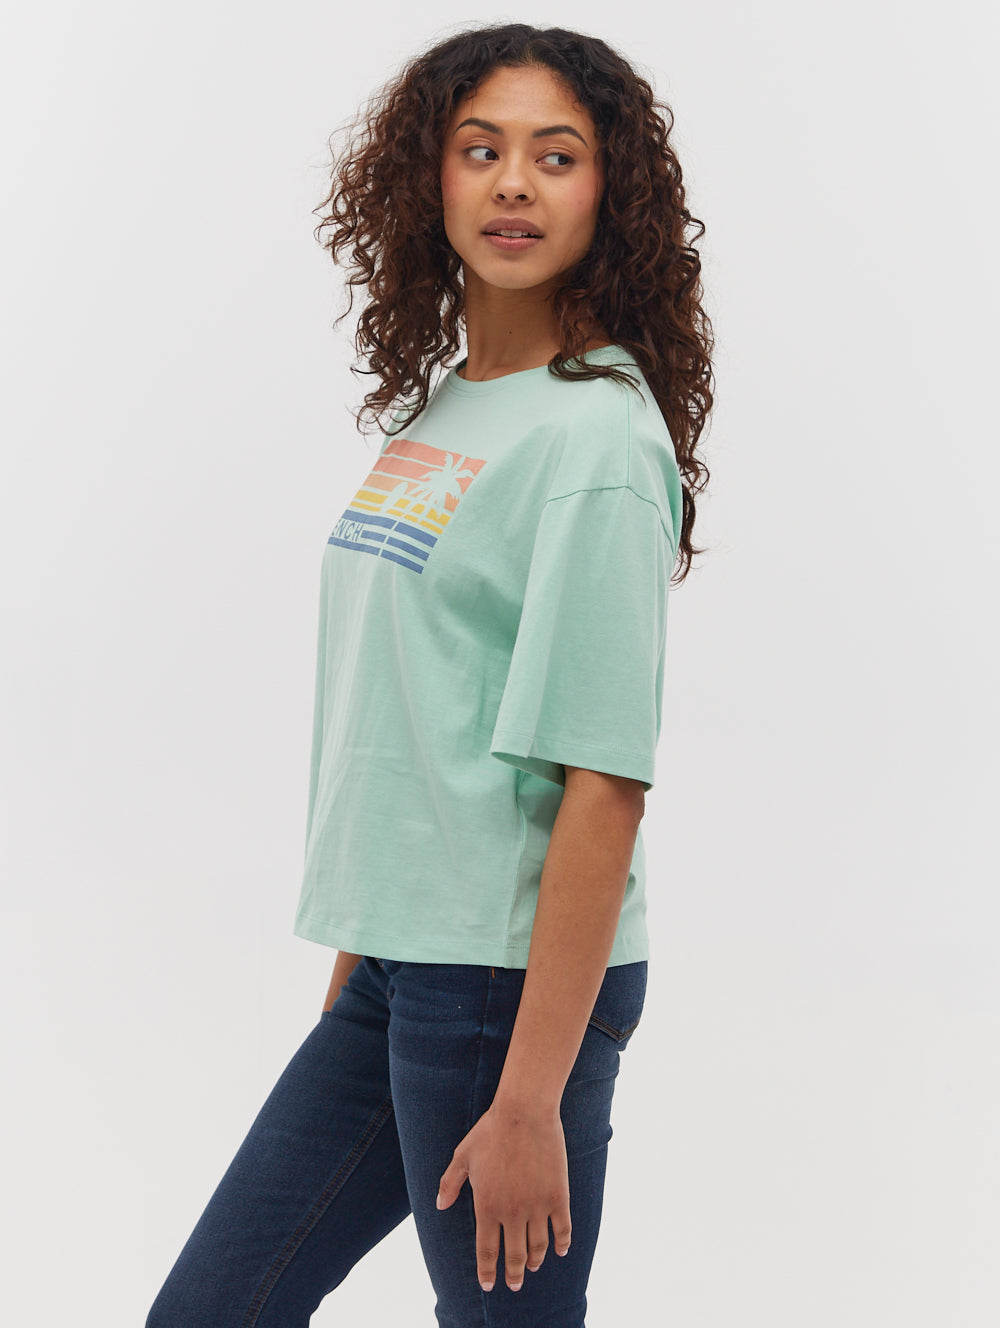 Bray Sunset Graphic Tee - BN4A128190